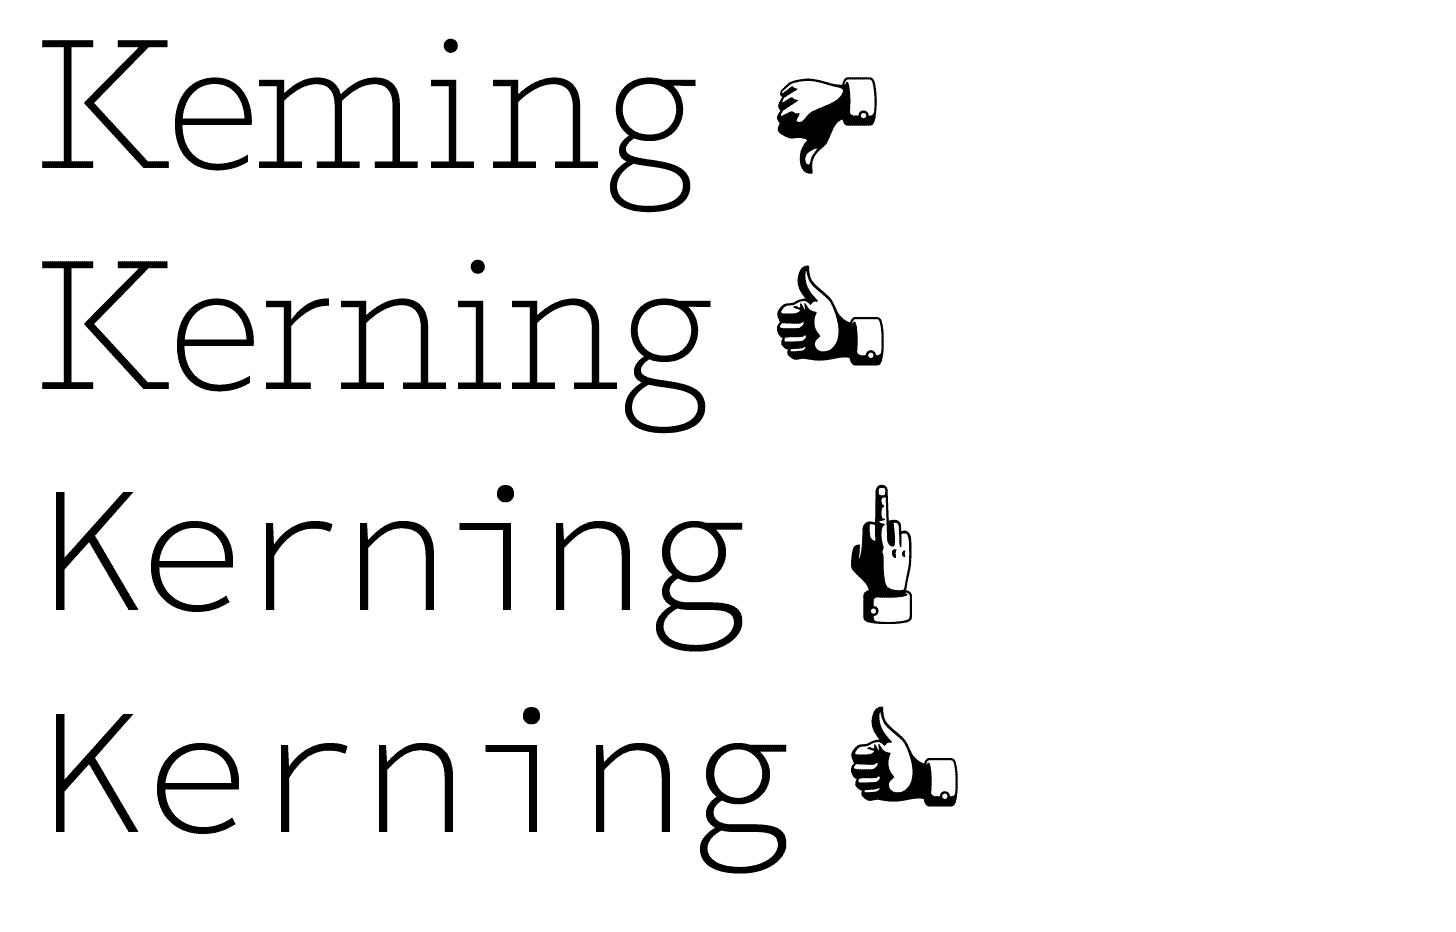 A kerning example.